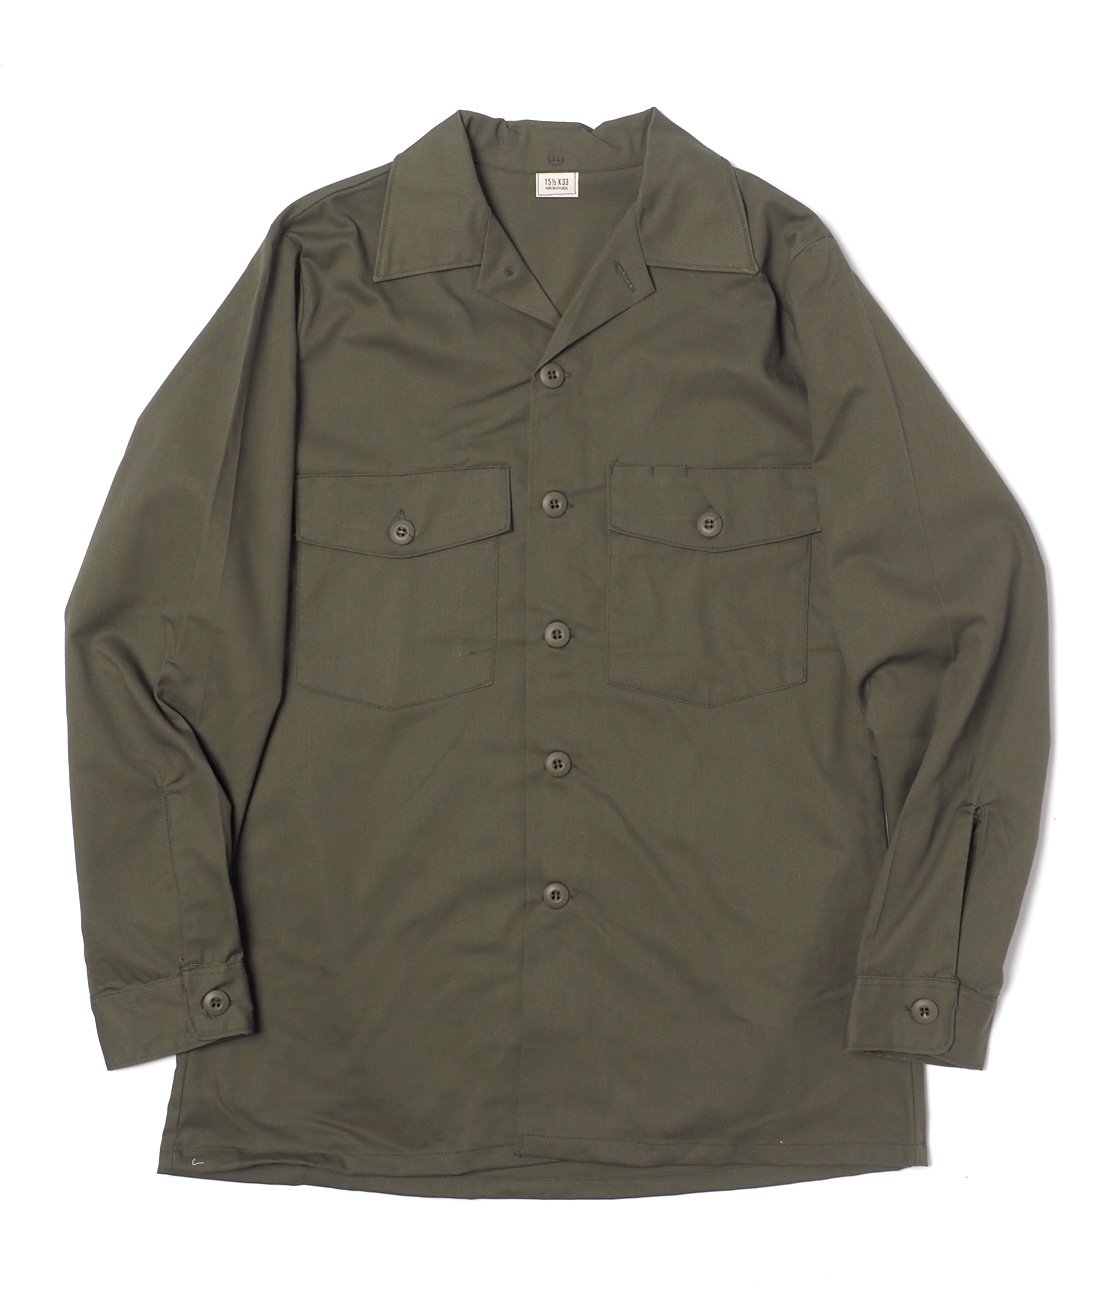 【DEAD STOCK】80s US ARMY UTILITY SHIRT - OLIVE GREEN 米軍 ミリタリーシャツ OG-507 -  HUNKY DORY